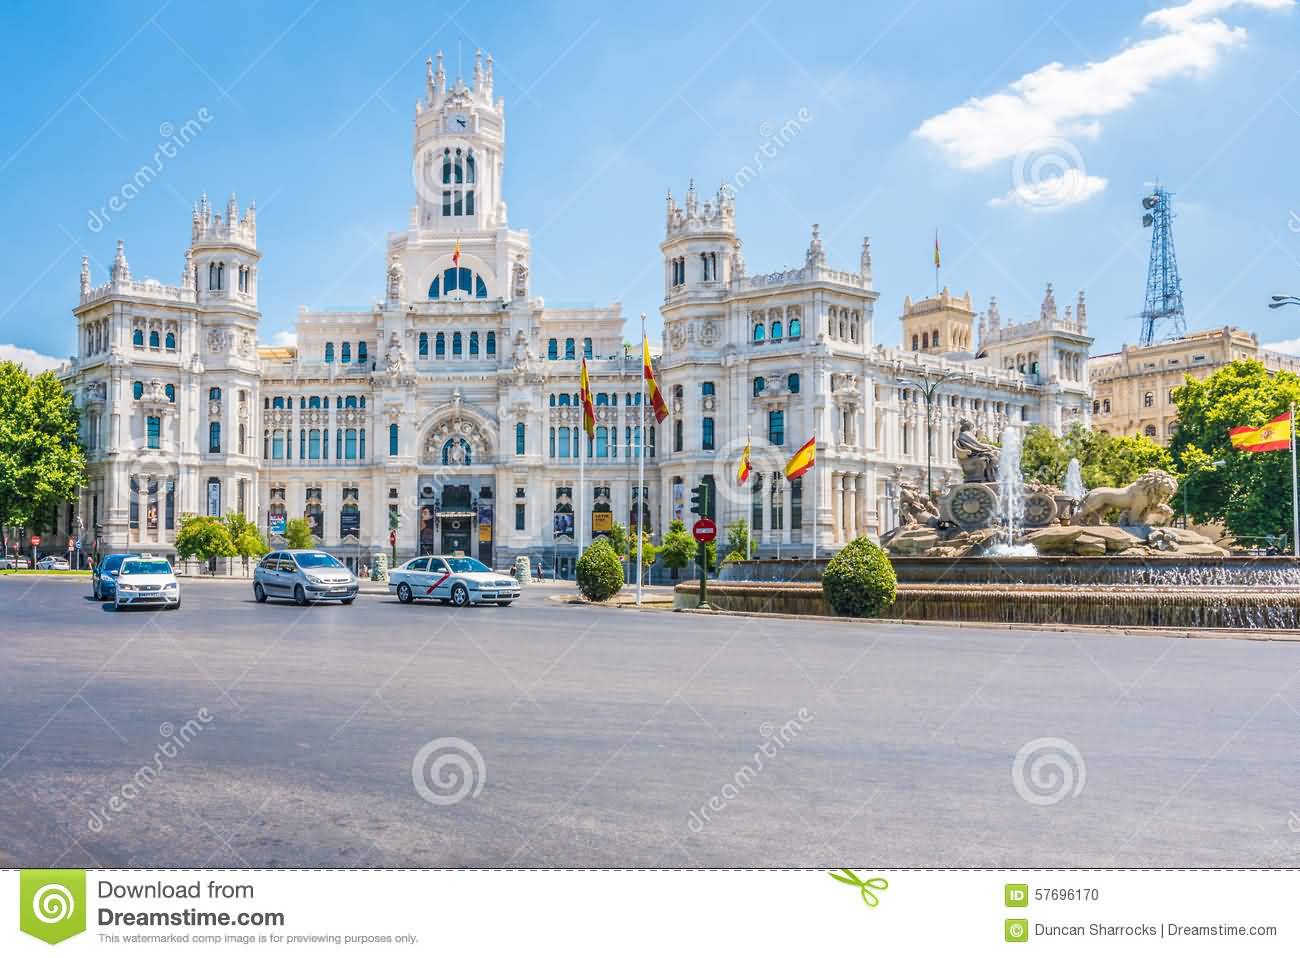 Cibeles Fountain And The Cybele Palace View